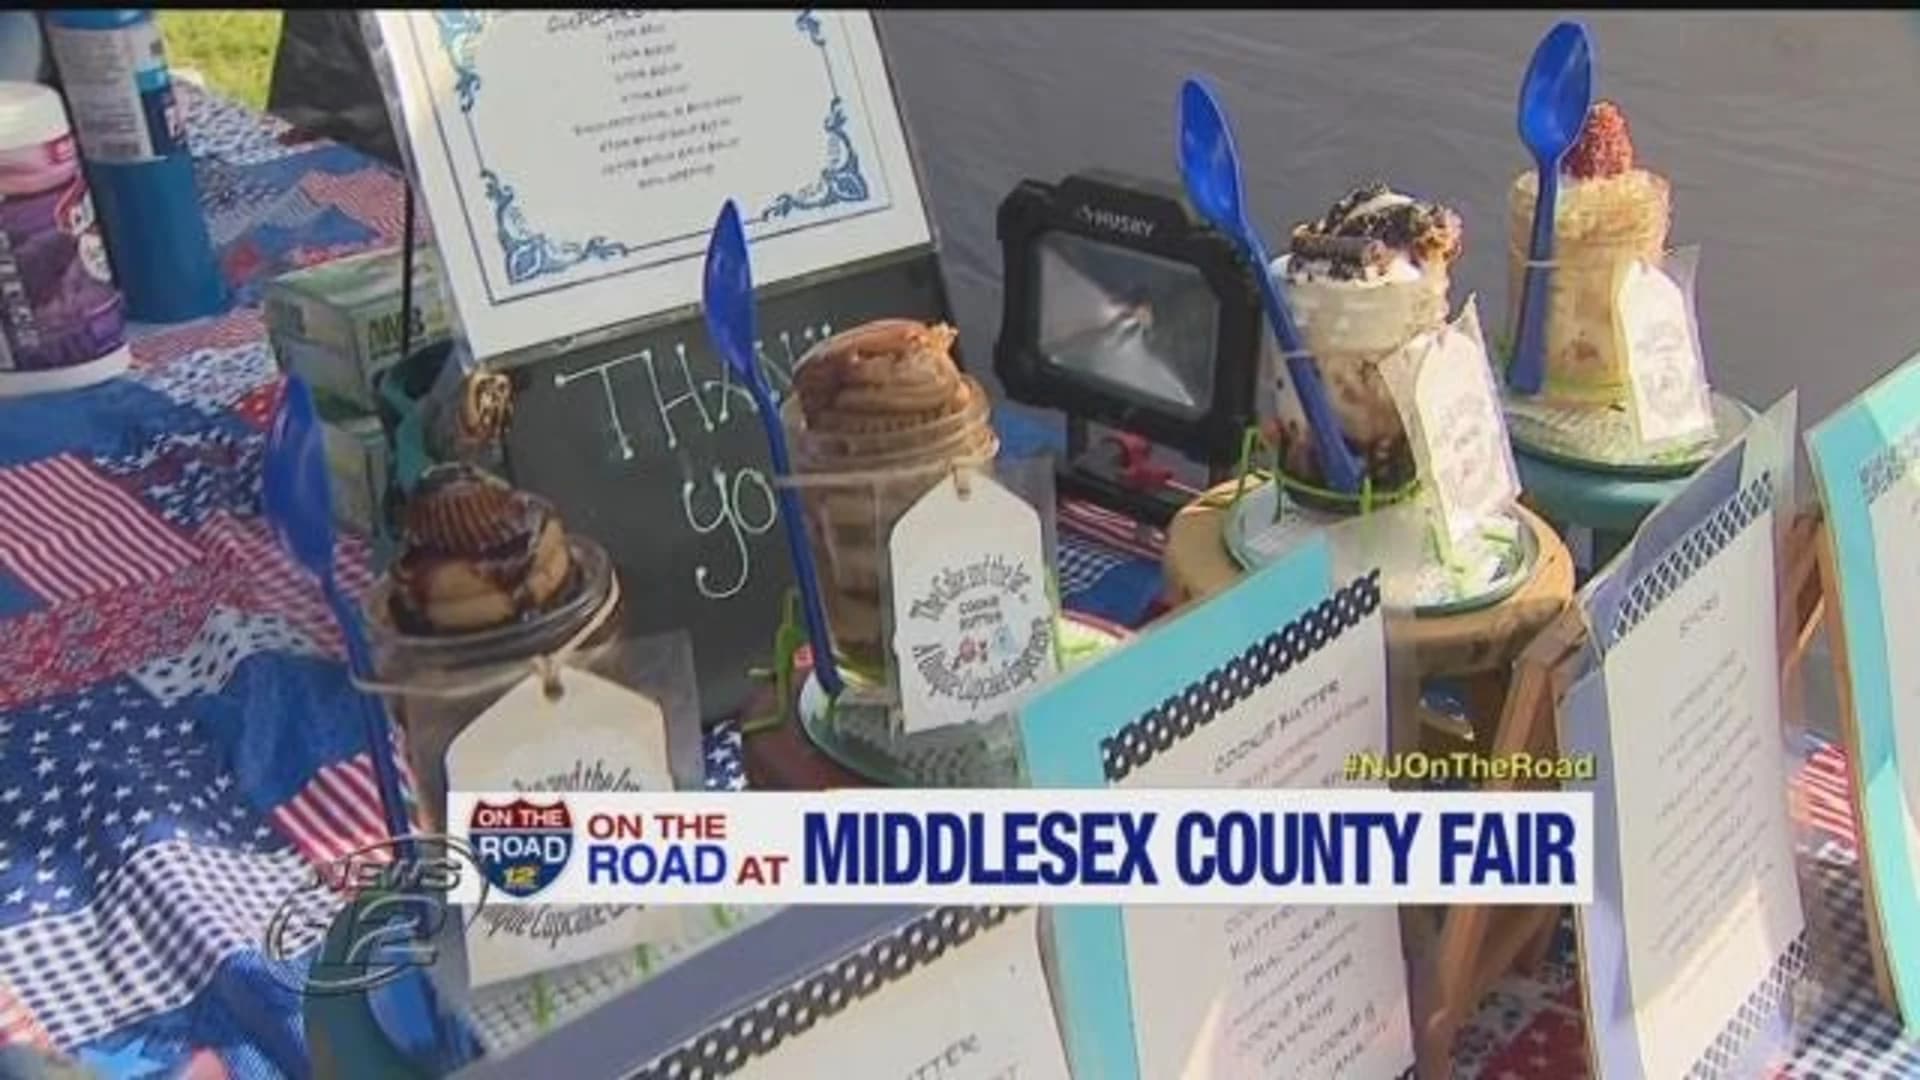 On The Road - Middlesex County Fair